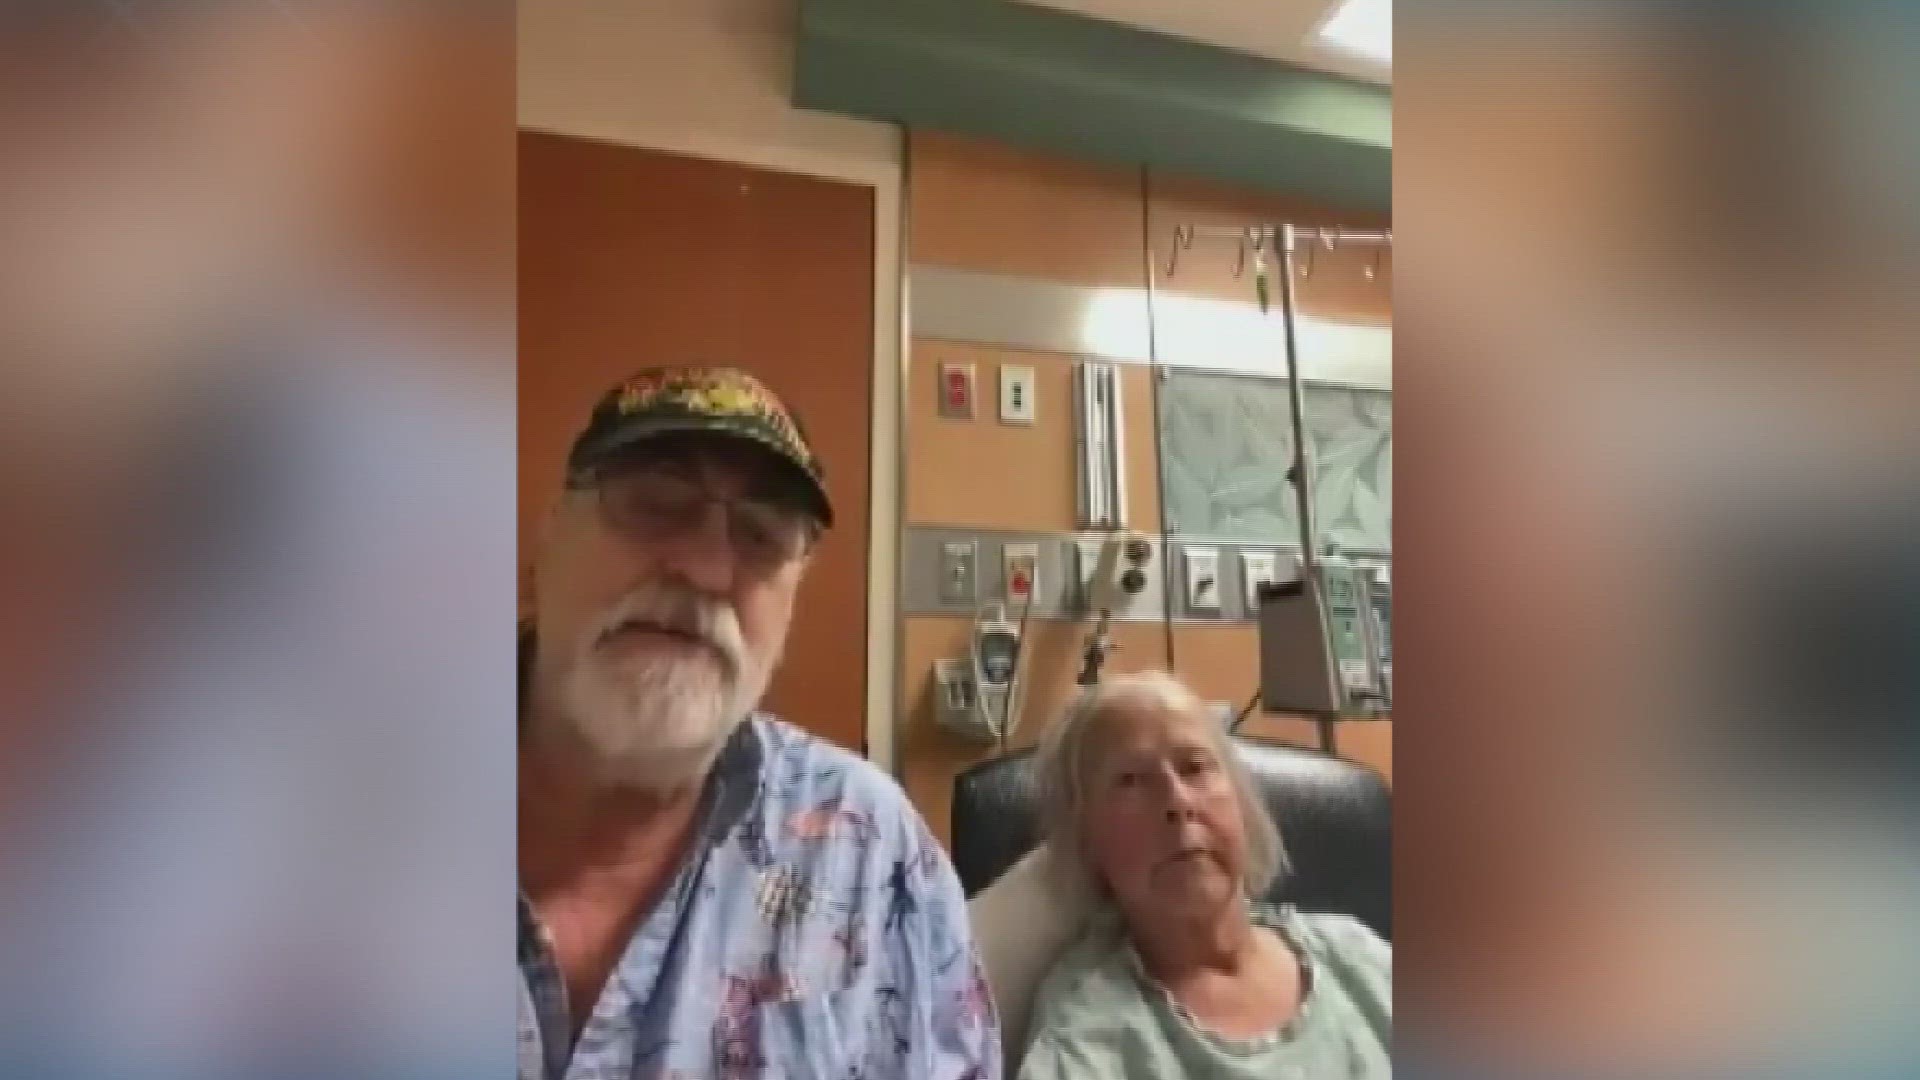 Some of her friends from church have started a GoFundMe to assist with medical bills.